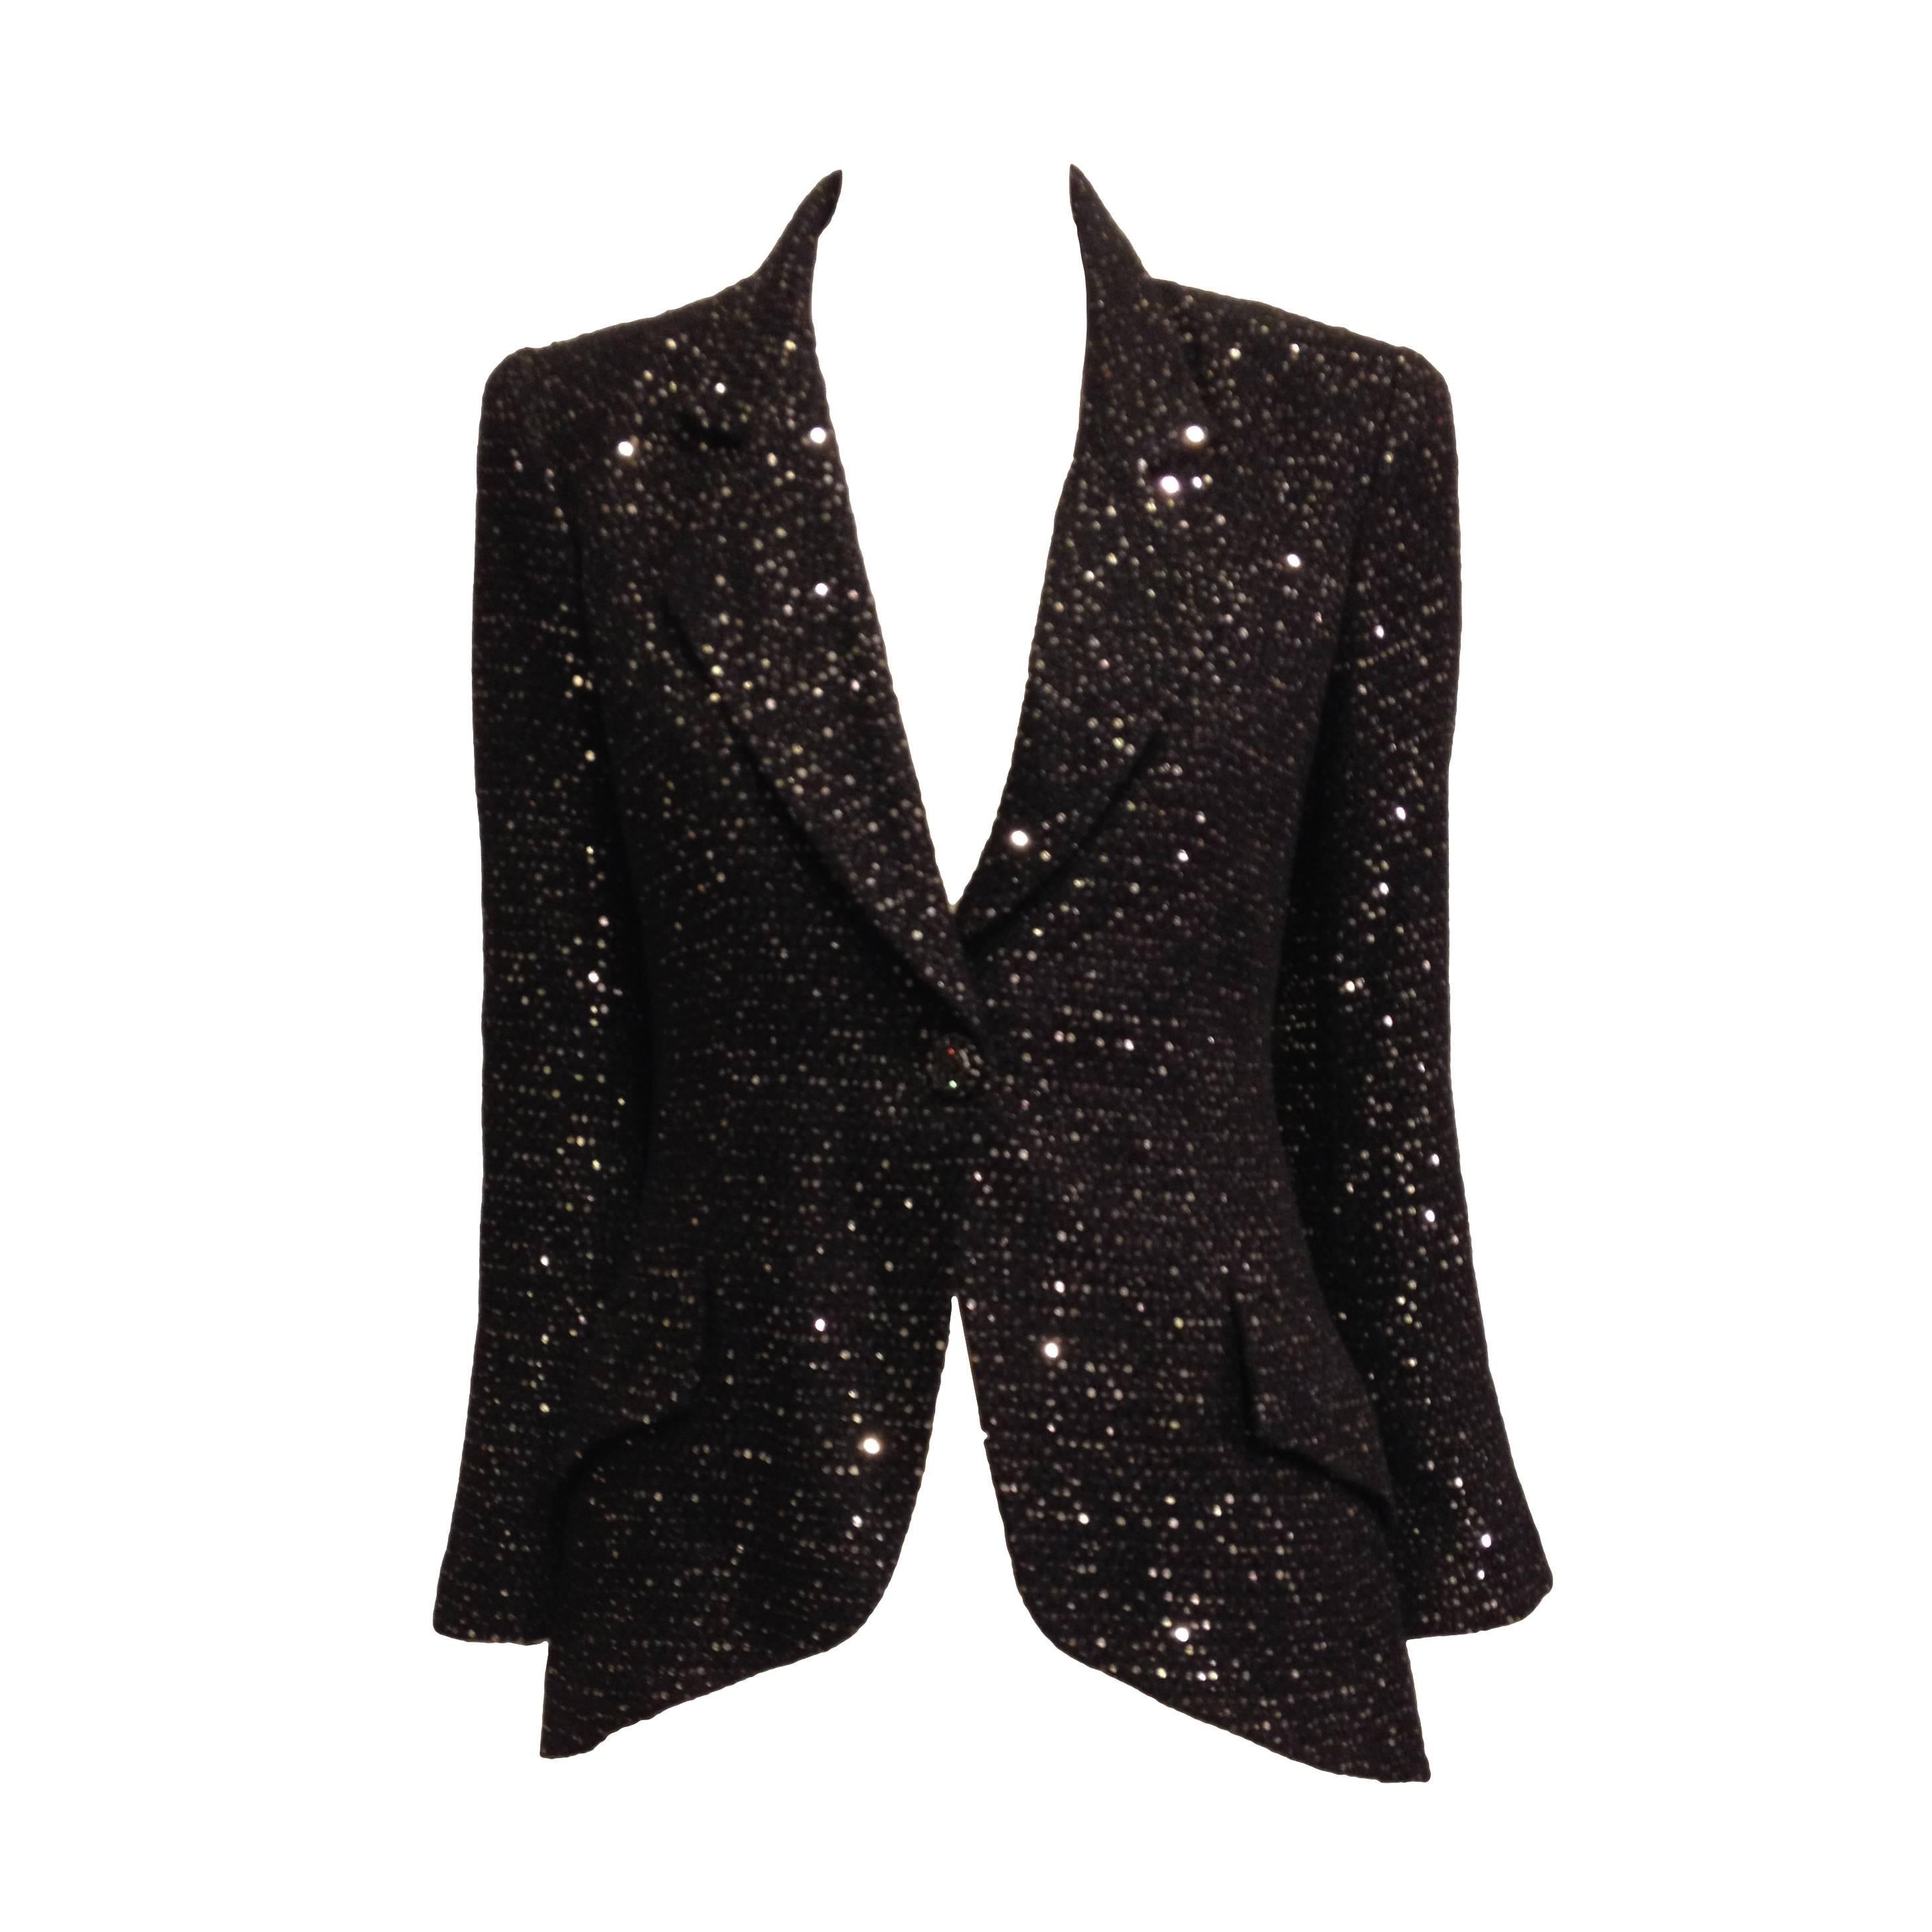 Chanel Black Tweed Jacket with Sequins Size 36 (4) For Sale